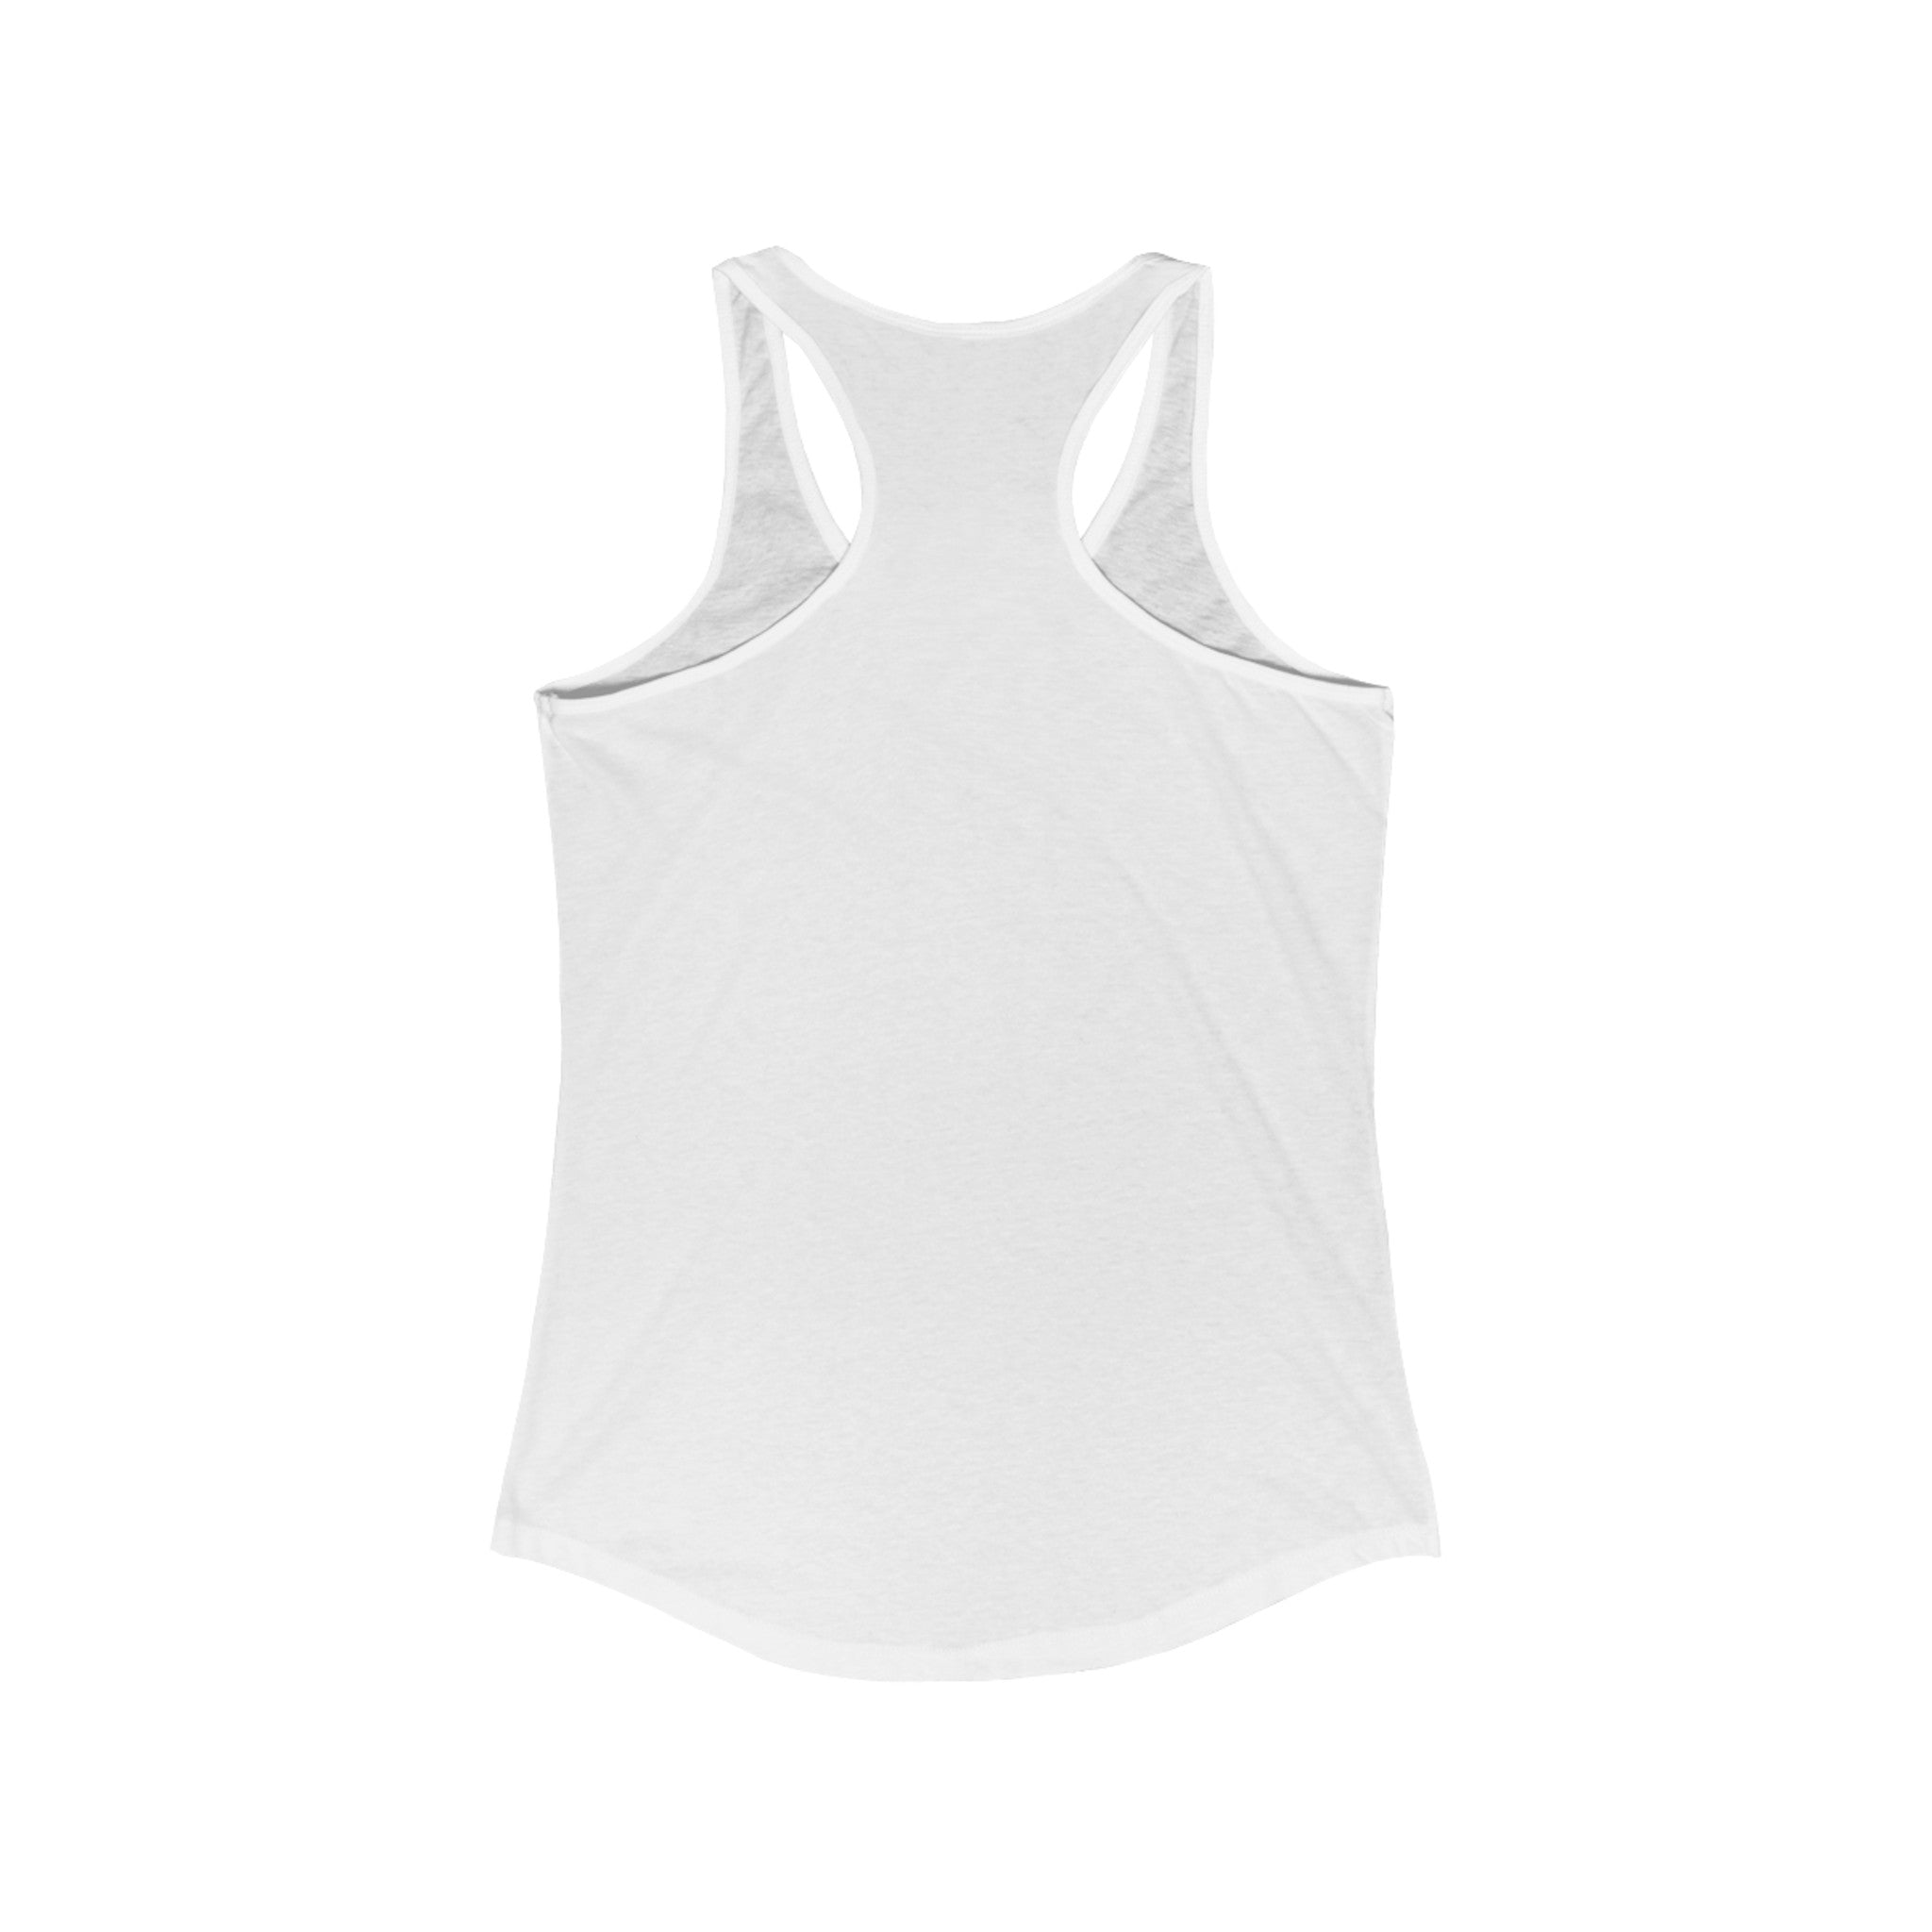 “Rolling Joints for Beginners” Tank - TRU2 Clothing